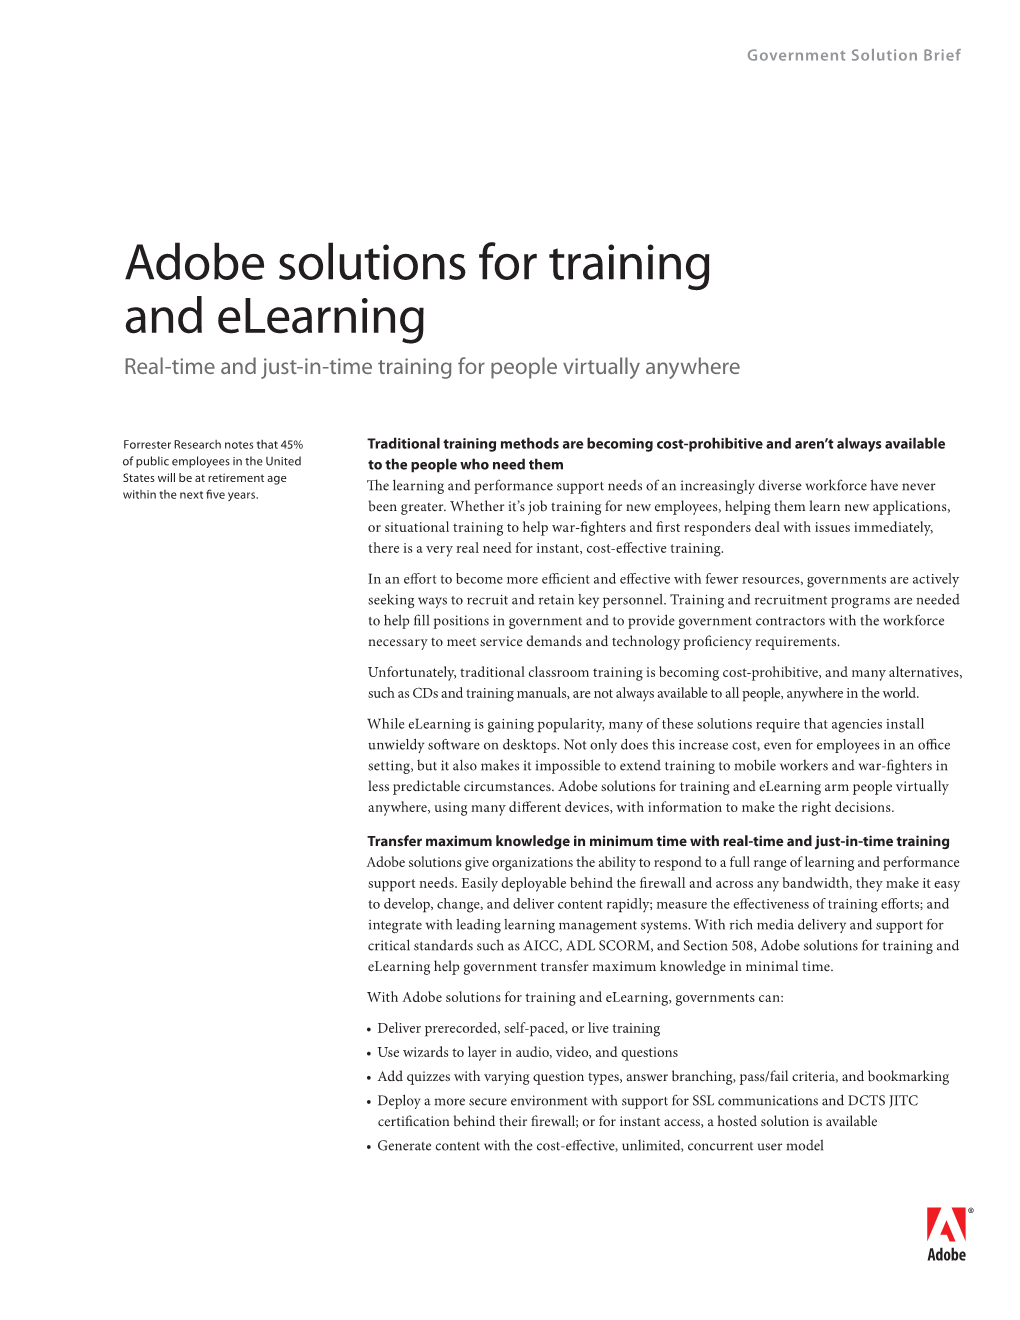 Adobe Solutions for Training and Elearning Real-Time and Just-In-Time Training for People Virtually Anywhere